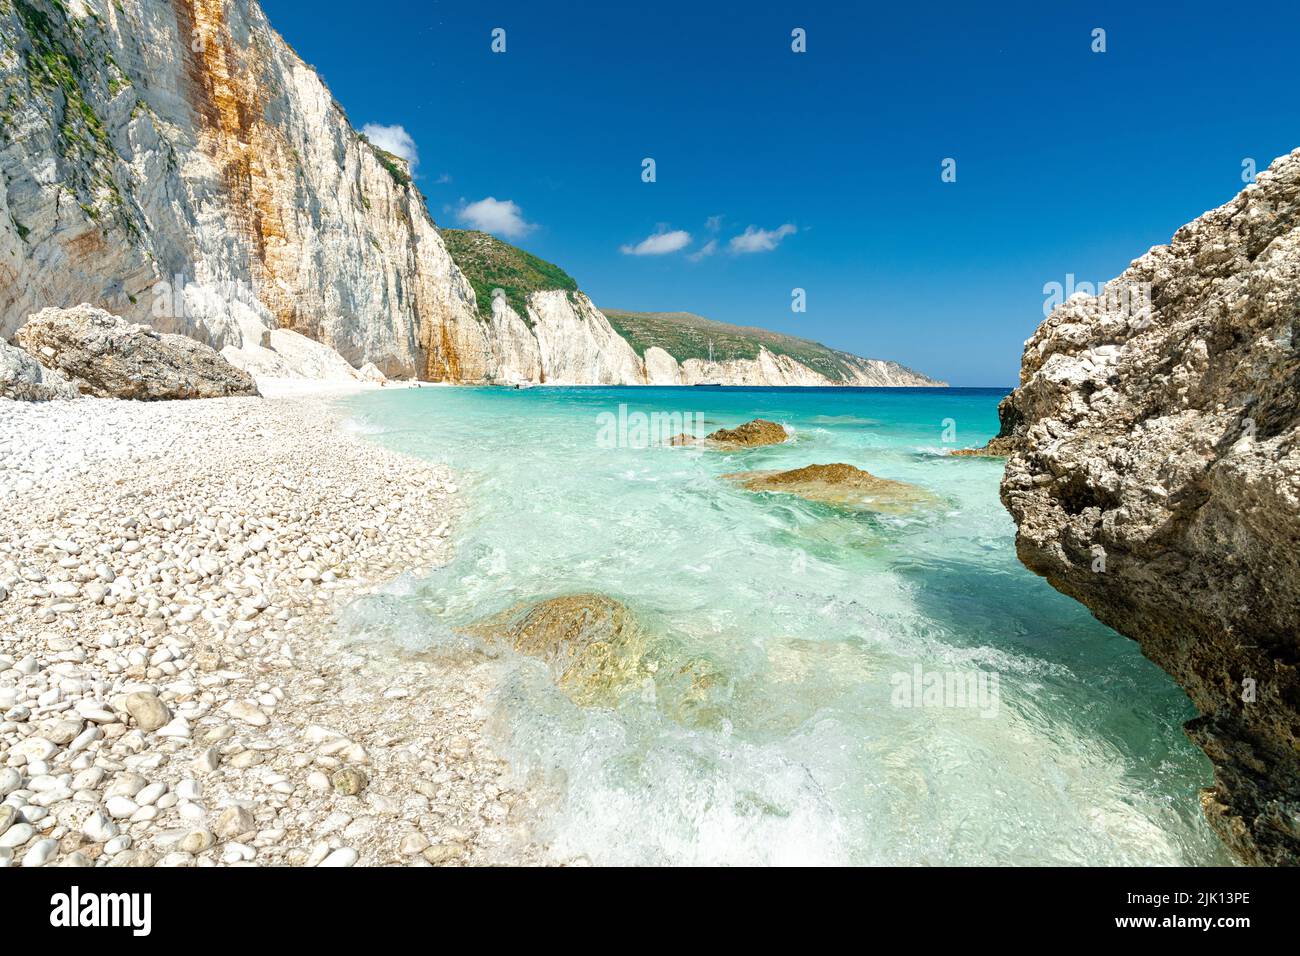 Waves of the turquoise clear sea washing the white stones of Fteri Beach, Kefalonia, Ionian Islands, Greek Islands, Greece, Europe Stock Photo